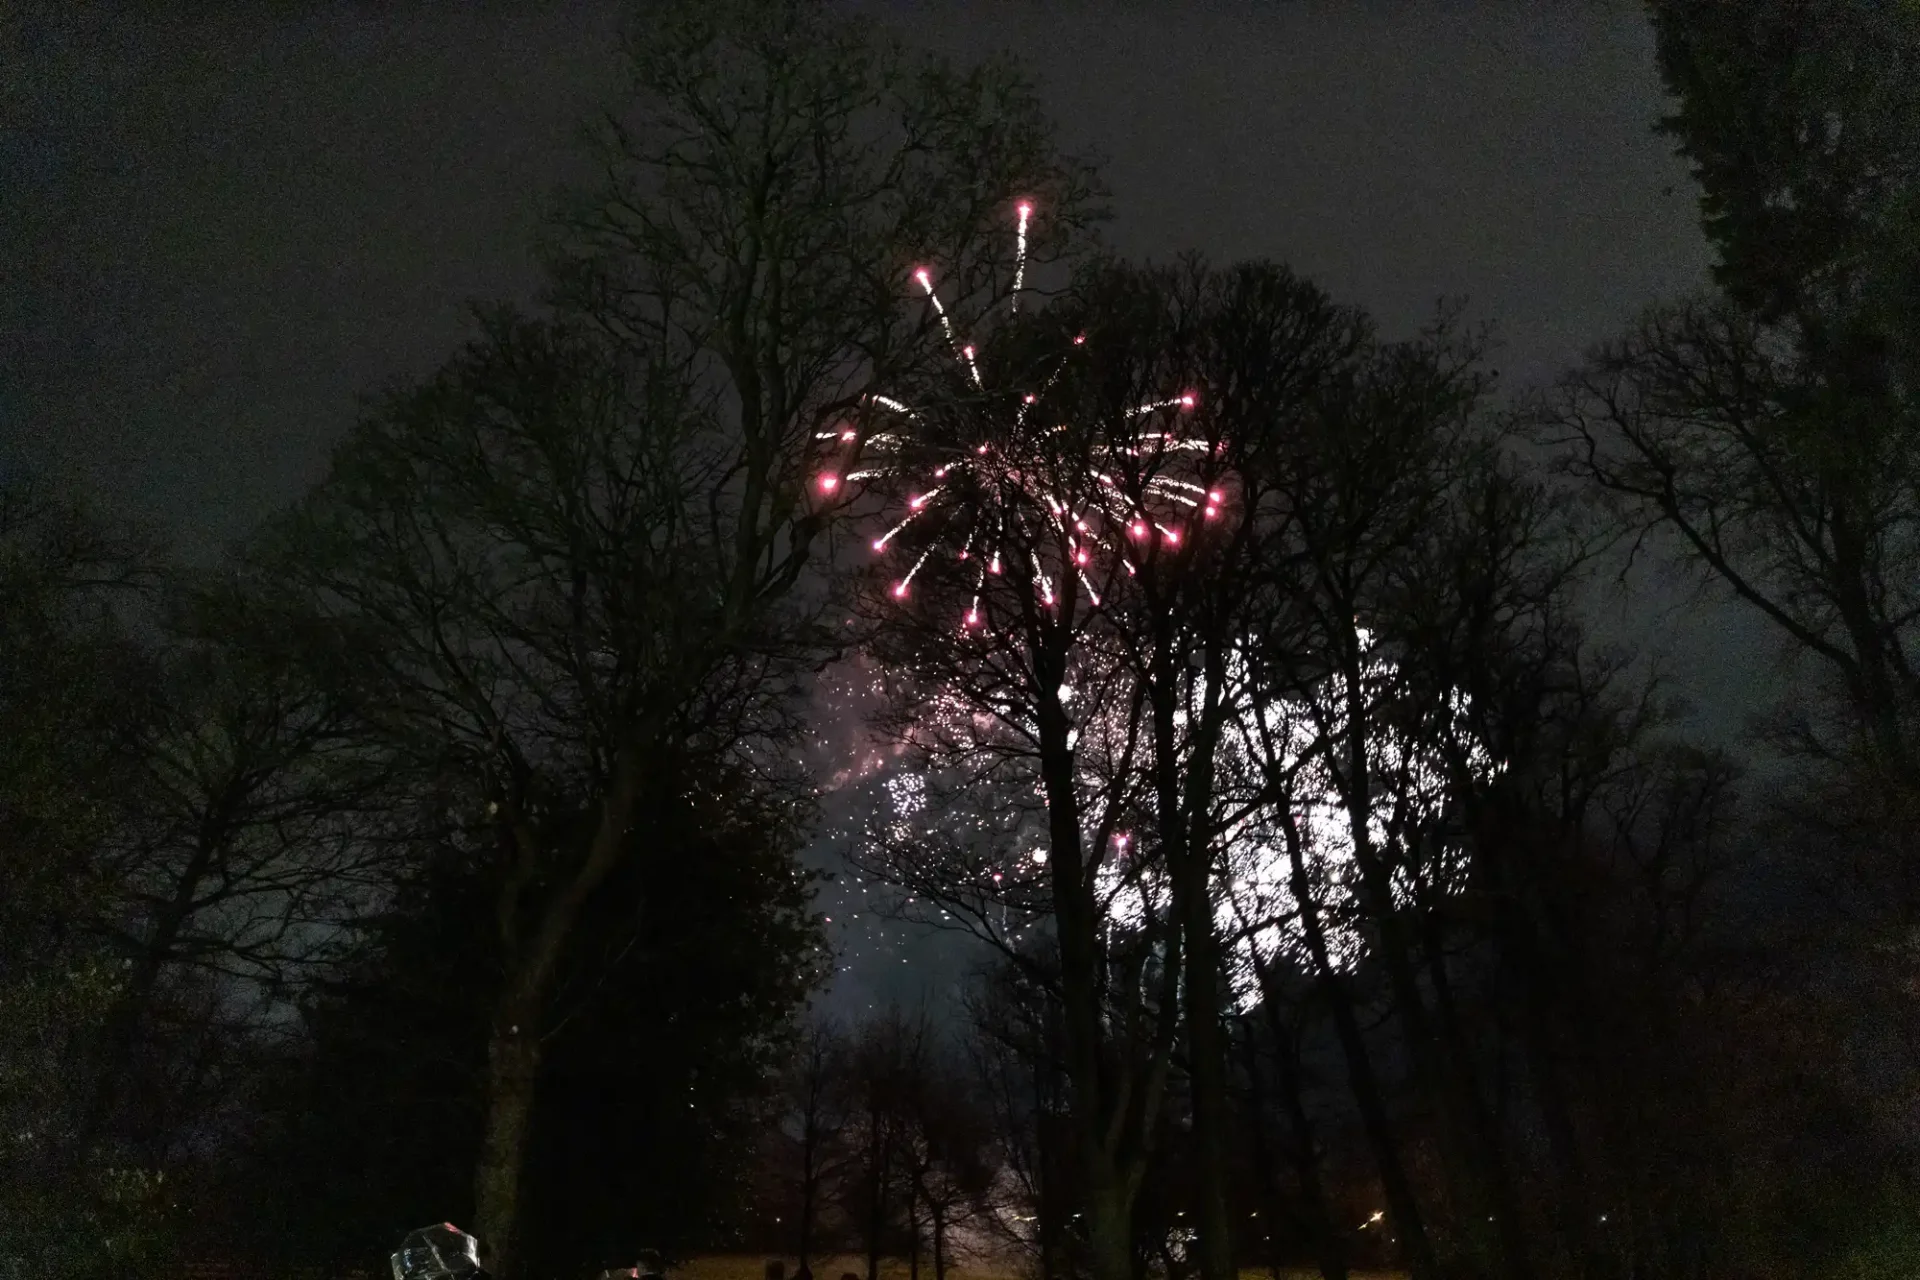 Nighttime view of fireworks bursting in pink and white colors above dark silhouetted trees in a park.